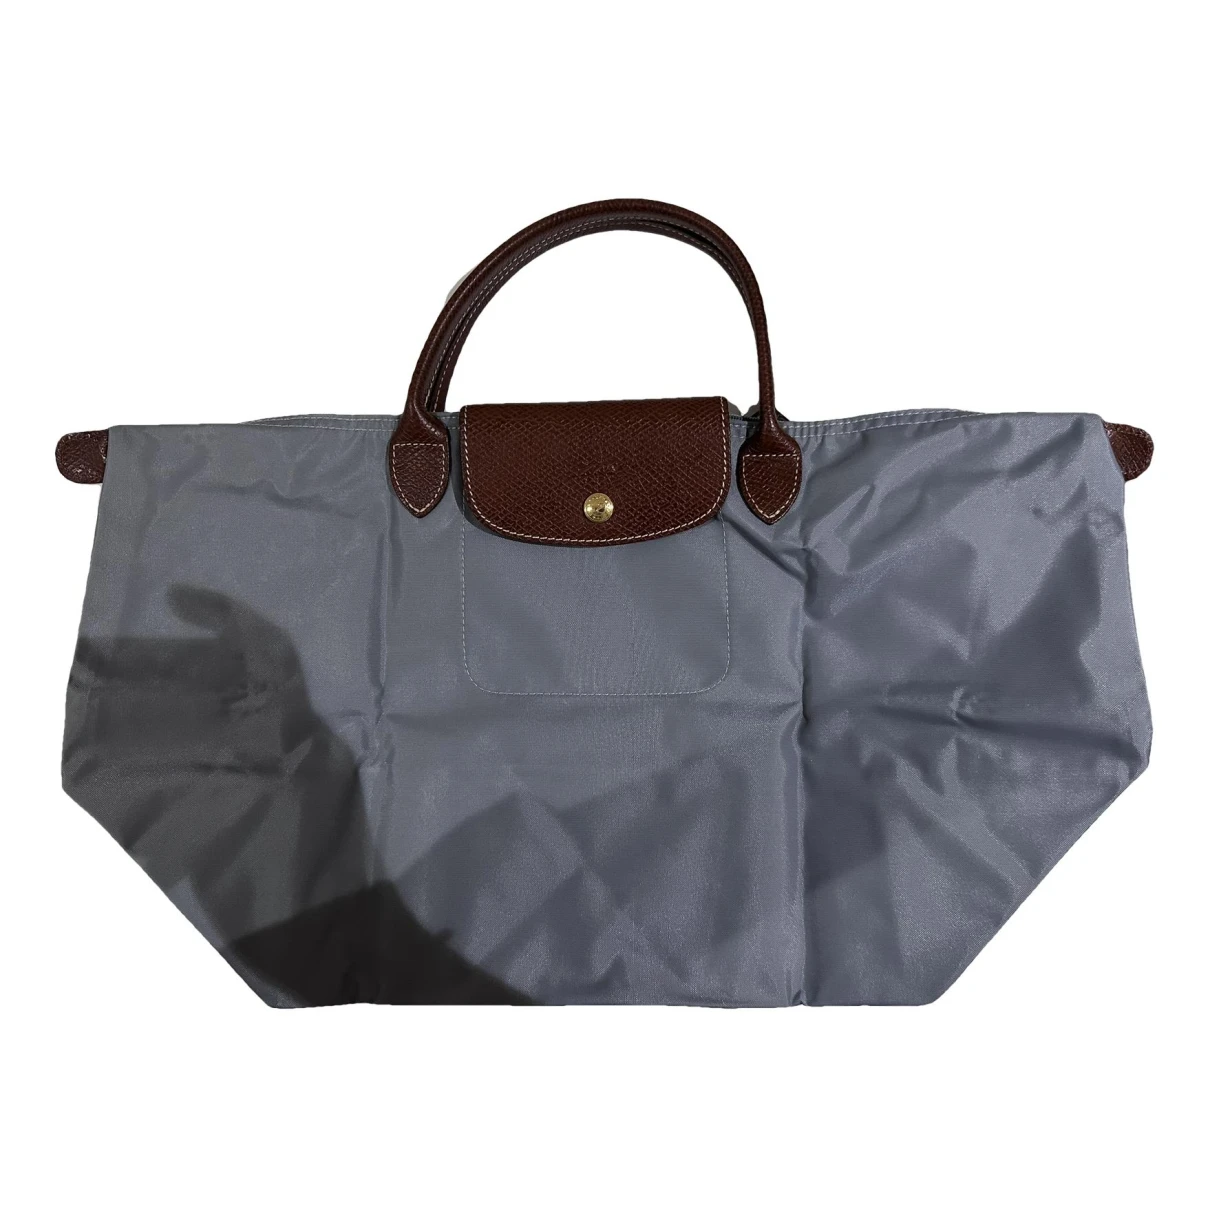 Pre-owned Longchamp Pliage Leather Handbag In Grey